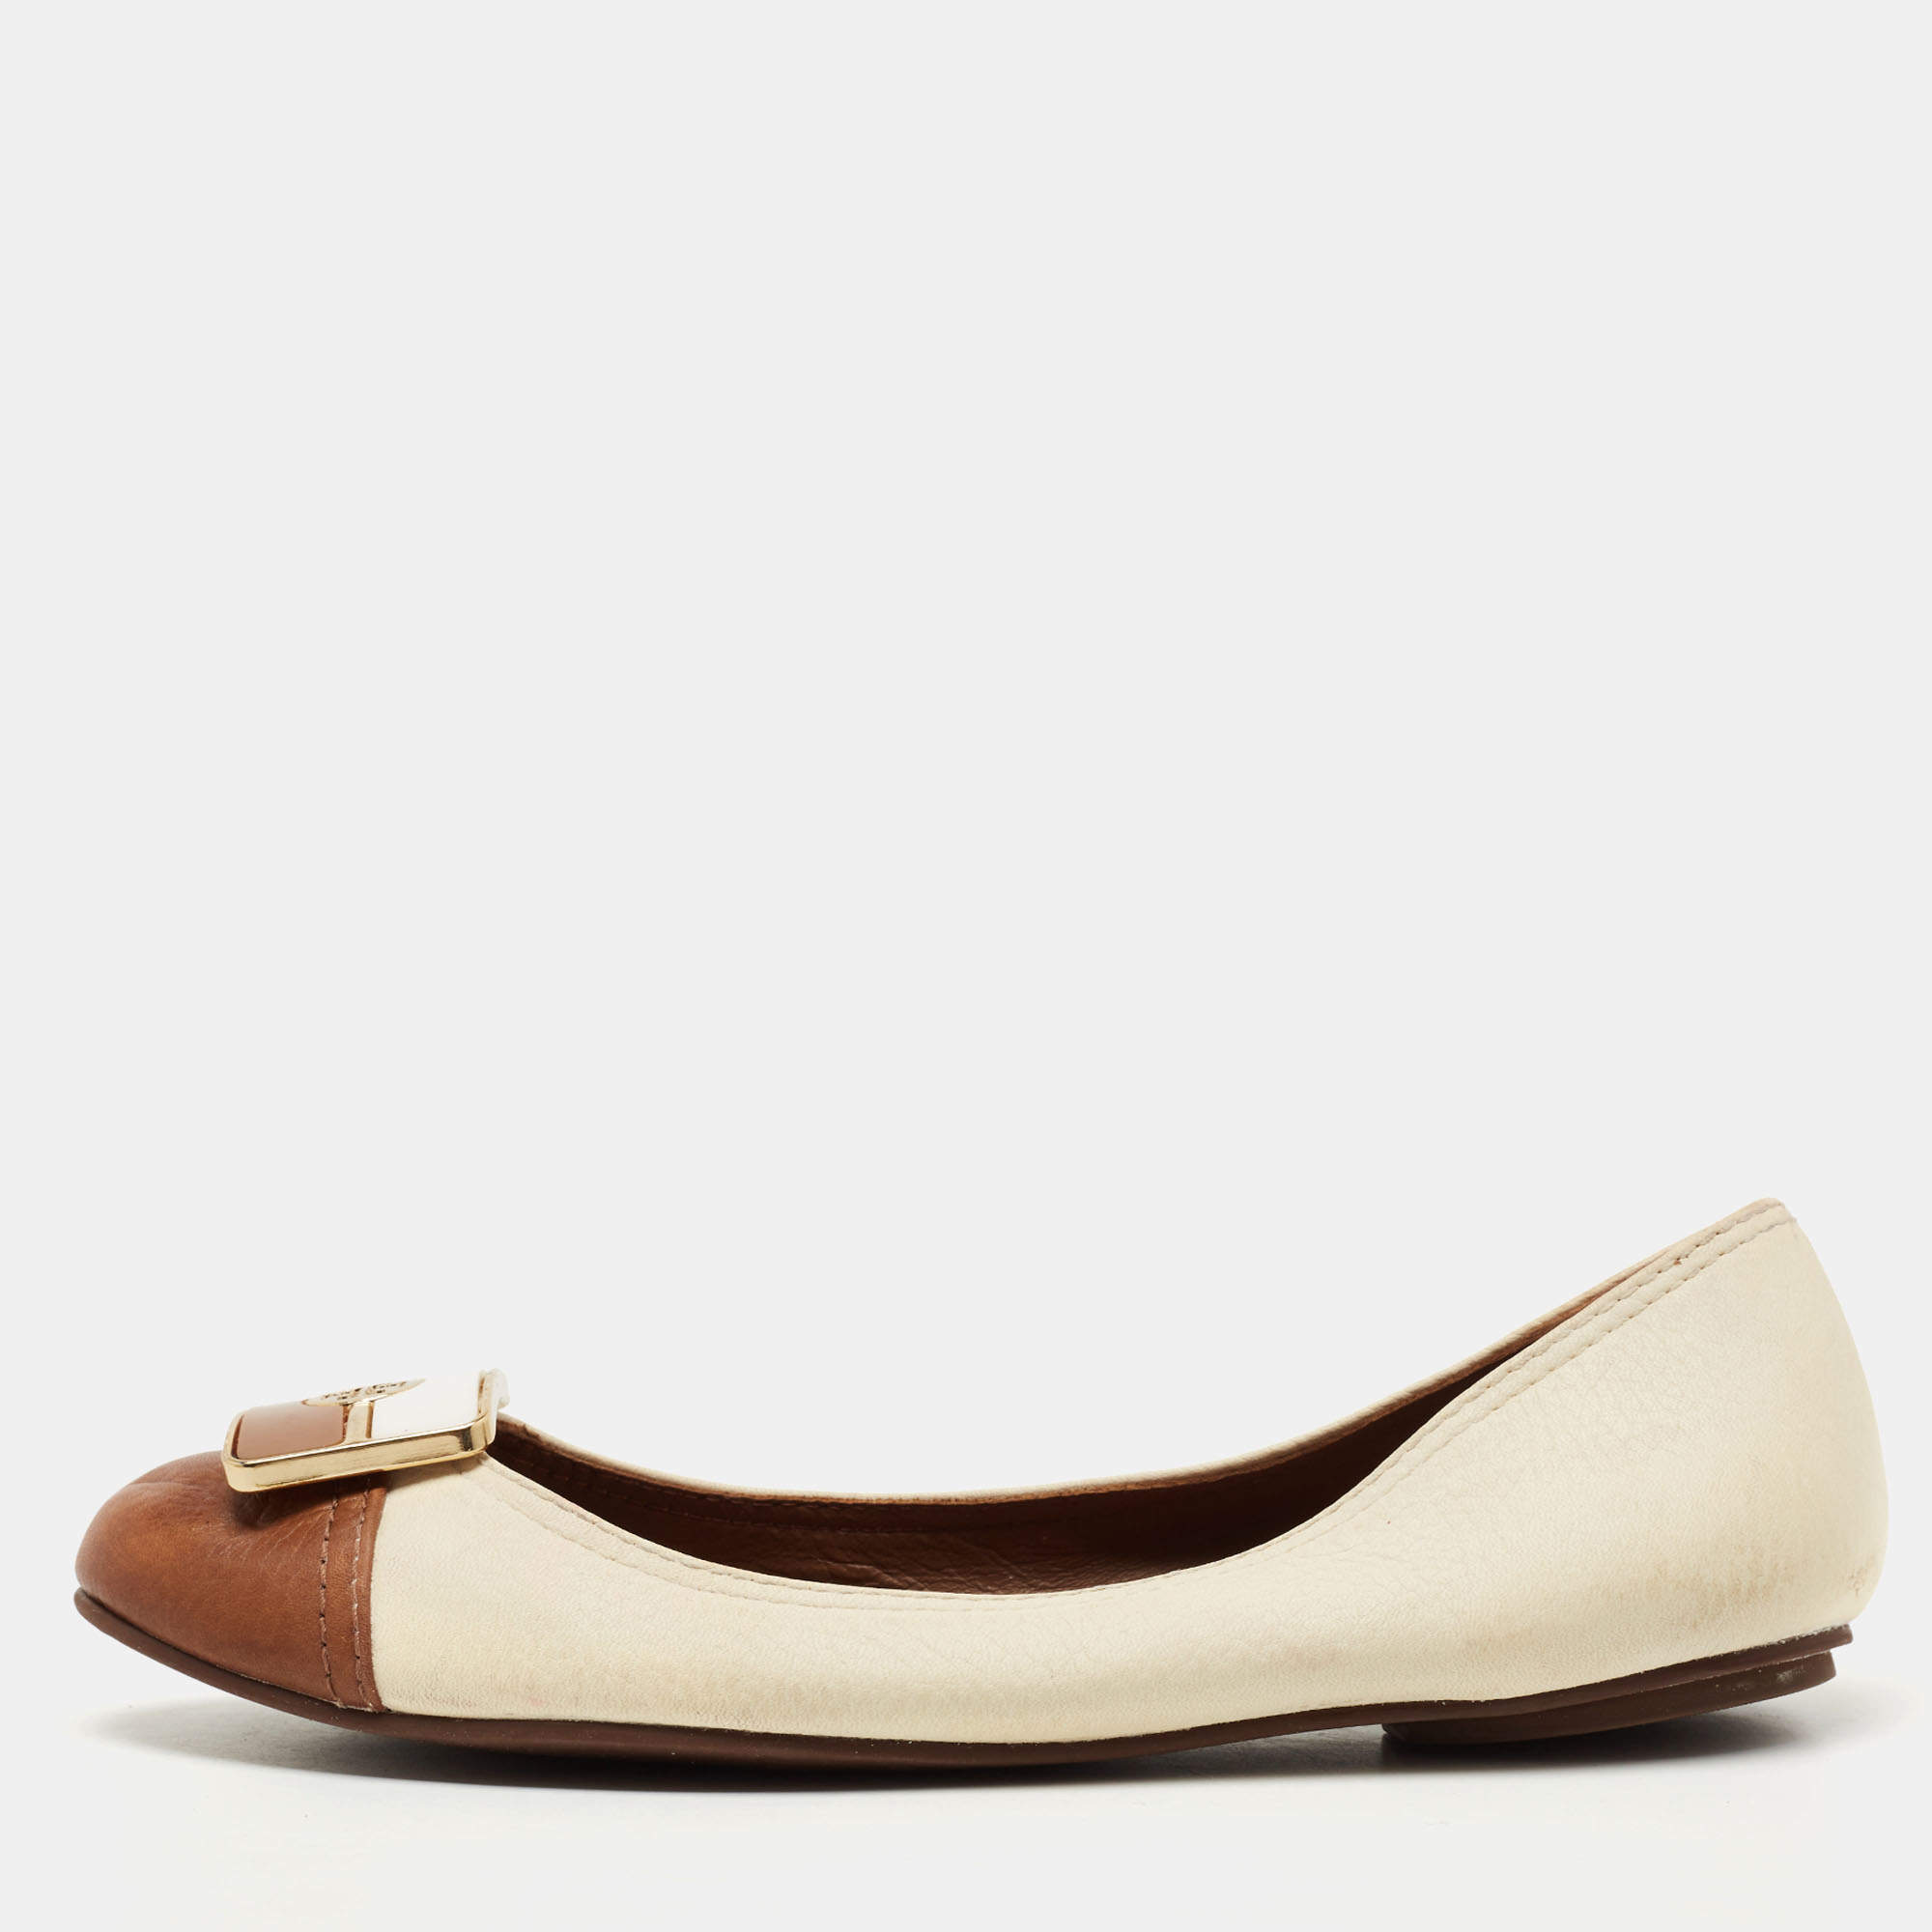 Tory Burch Brown/Off White Leather Ballet Flats Size  Tory Burch | TLC